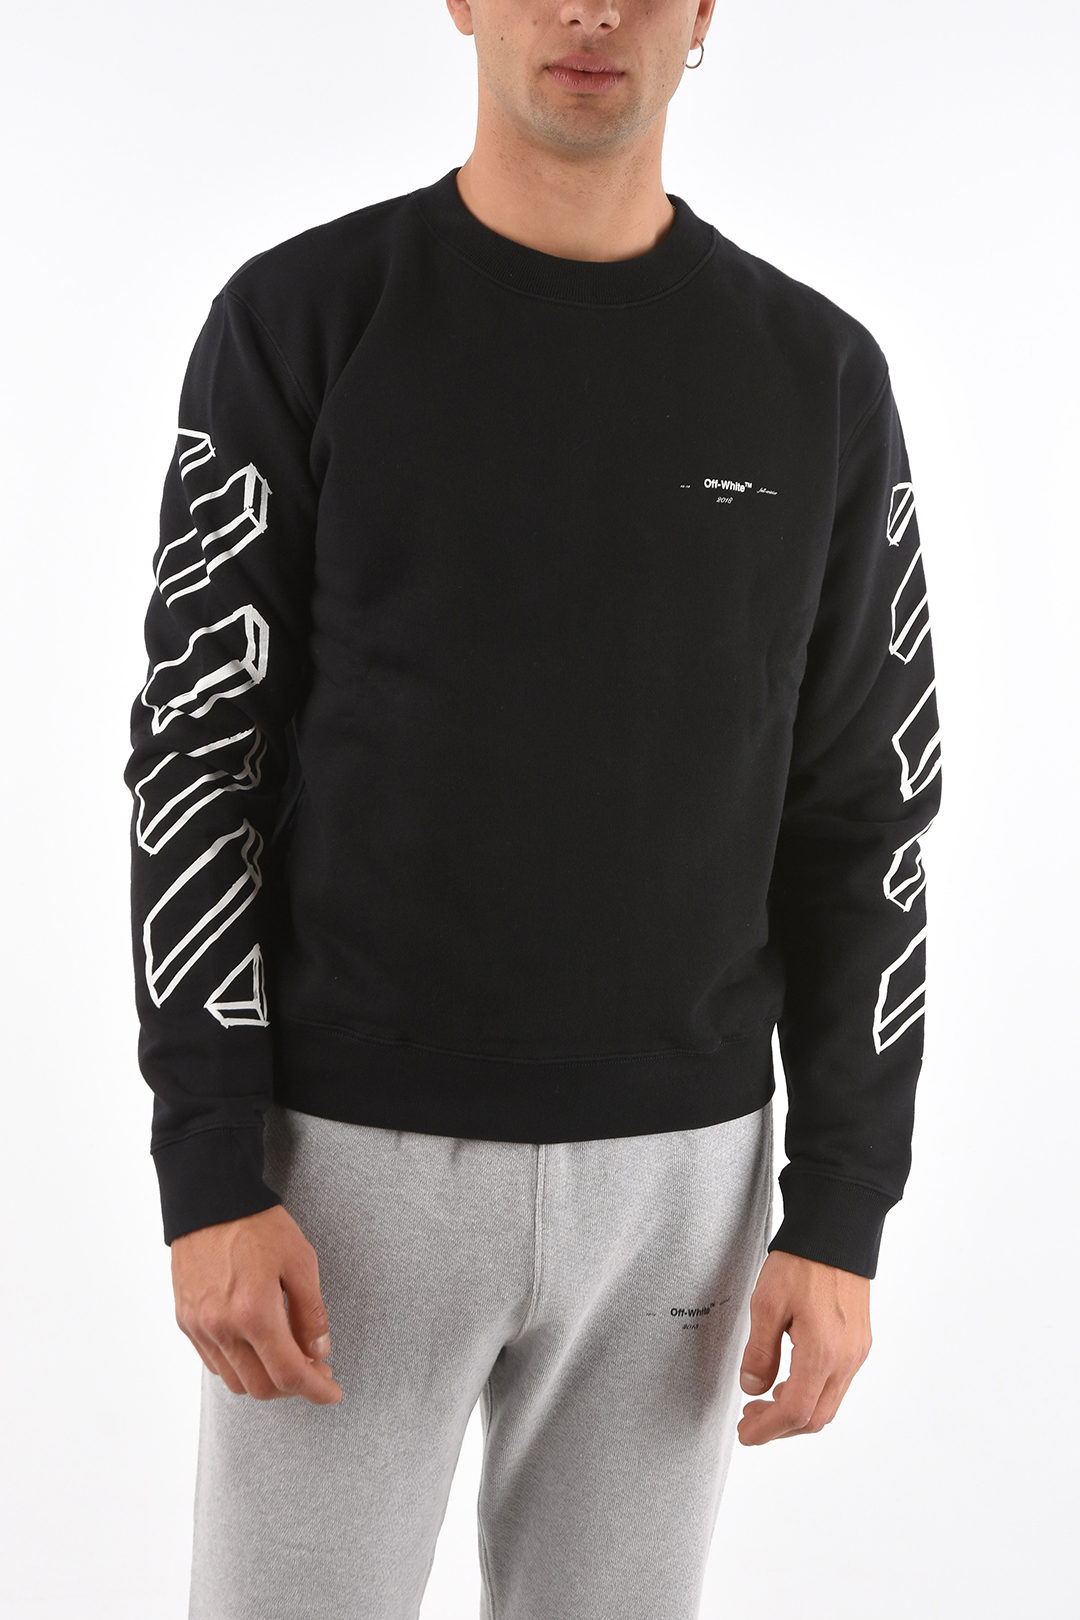 Off-White Brushed Cotton DIAG ARROWS Crew-Neck men - Glamood Outlet